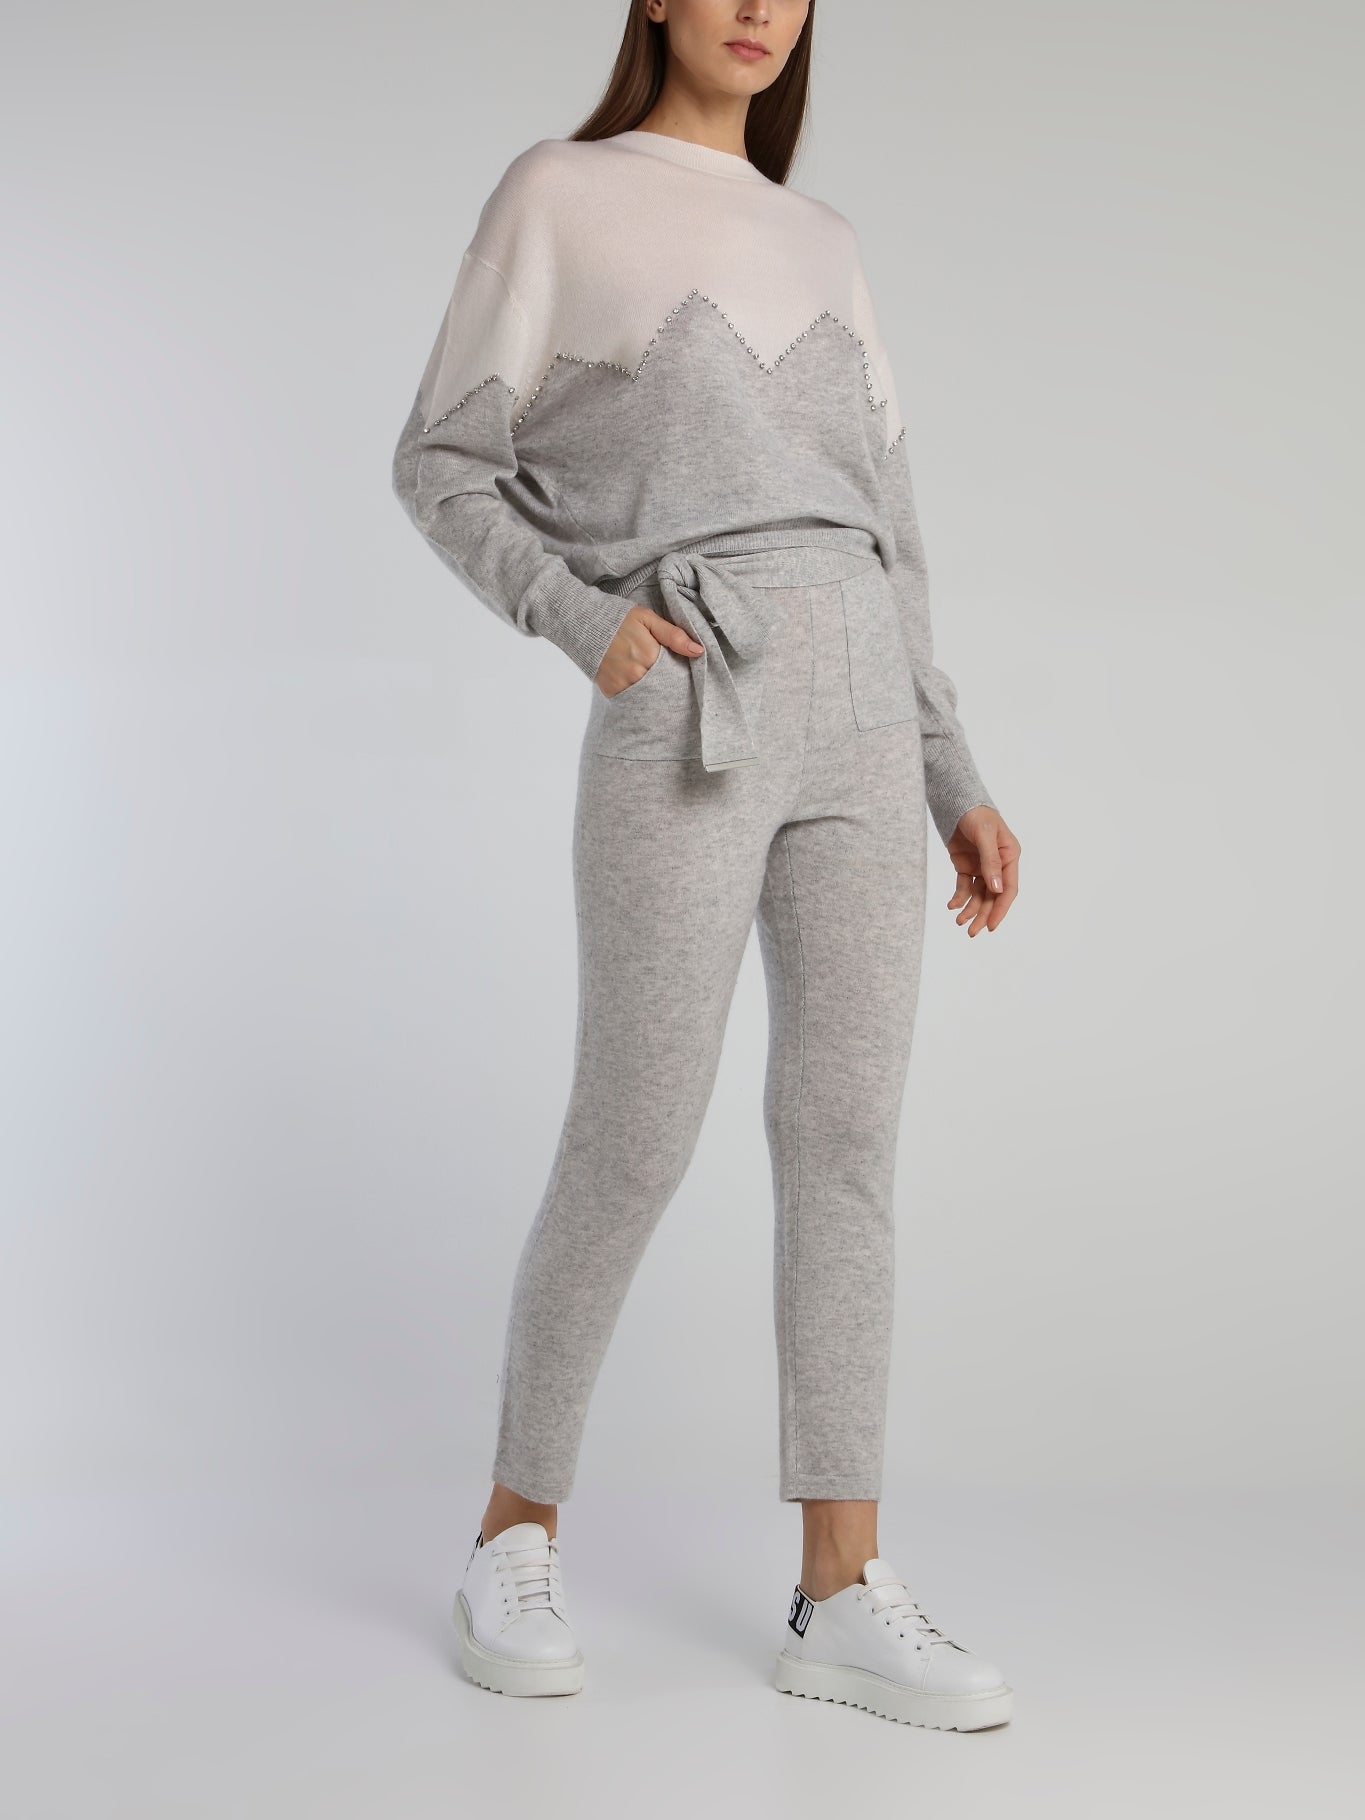 Babo Grey Tie Front Knit Pants